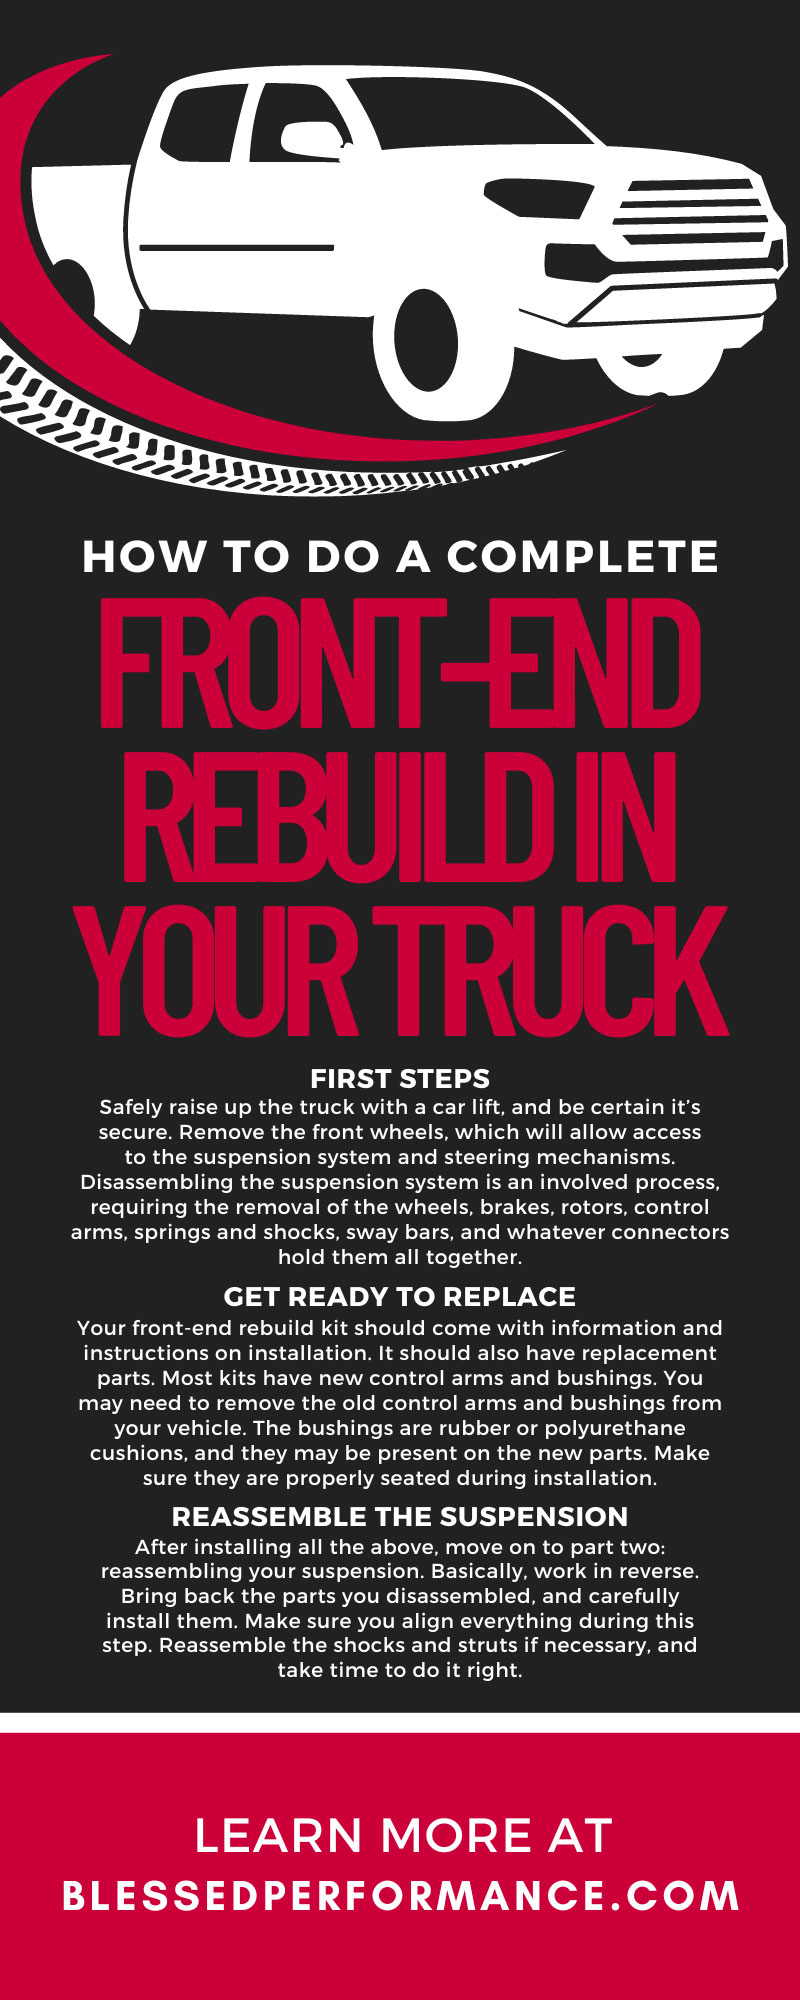 How To Do a Complete Front-End Rebuild in Your Truck